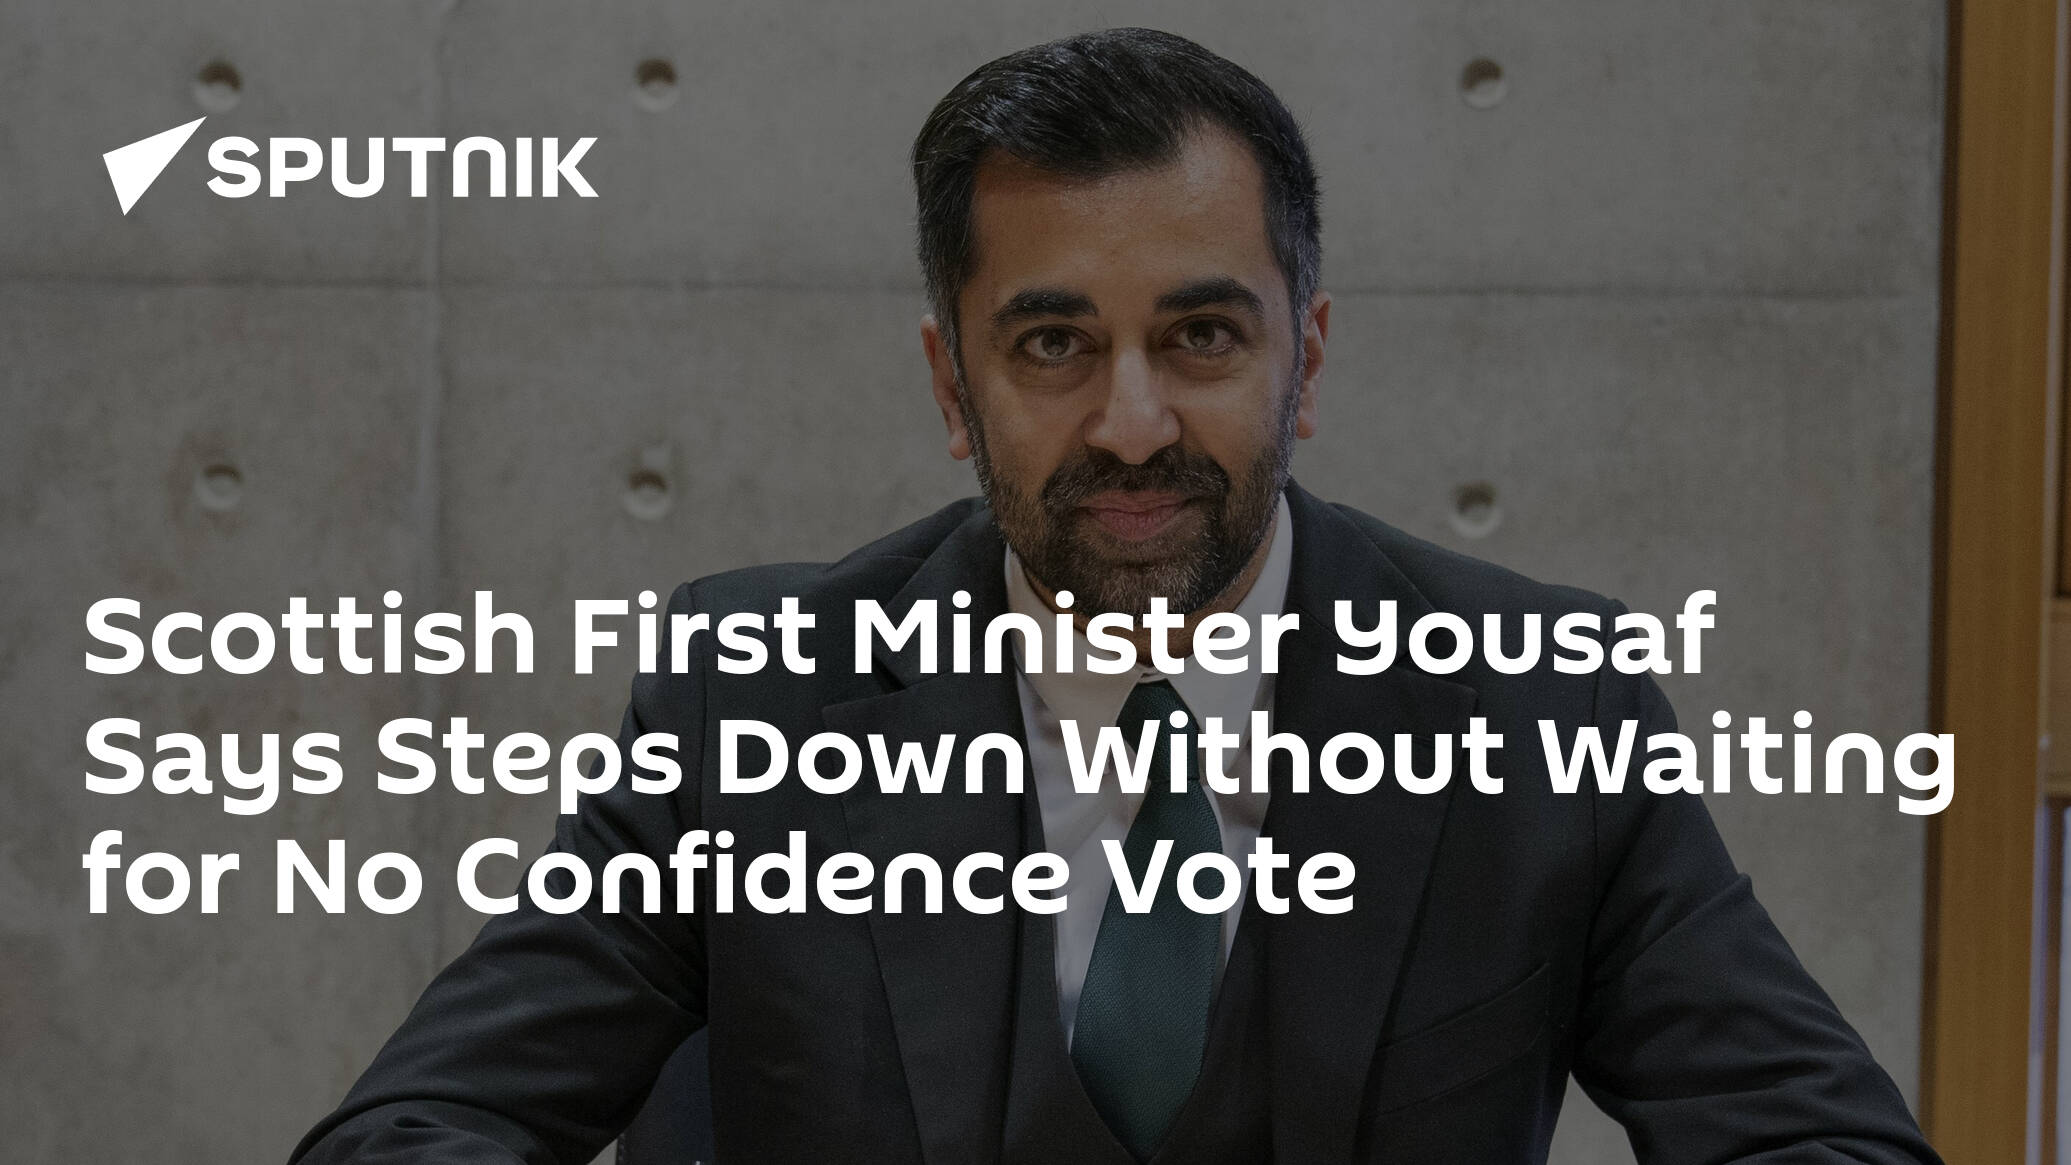 Scottish First Minister Yousaf Says Steps Down Without Waiting for No Confidence Vote